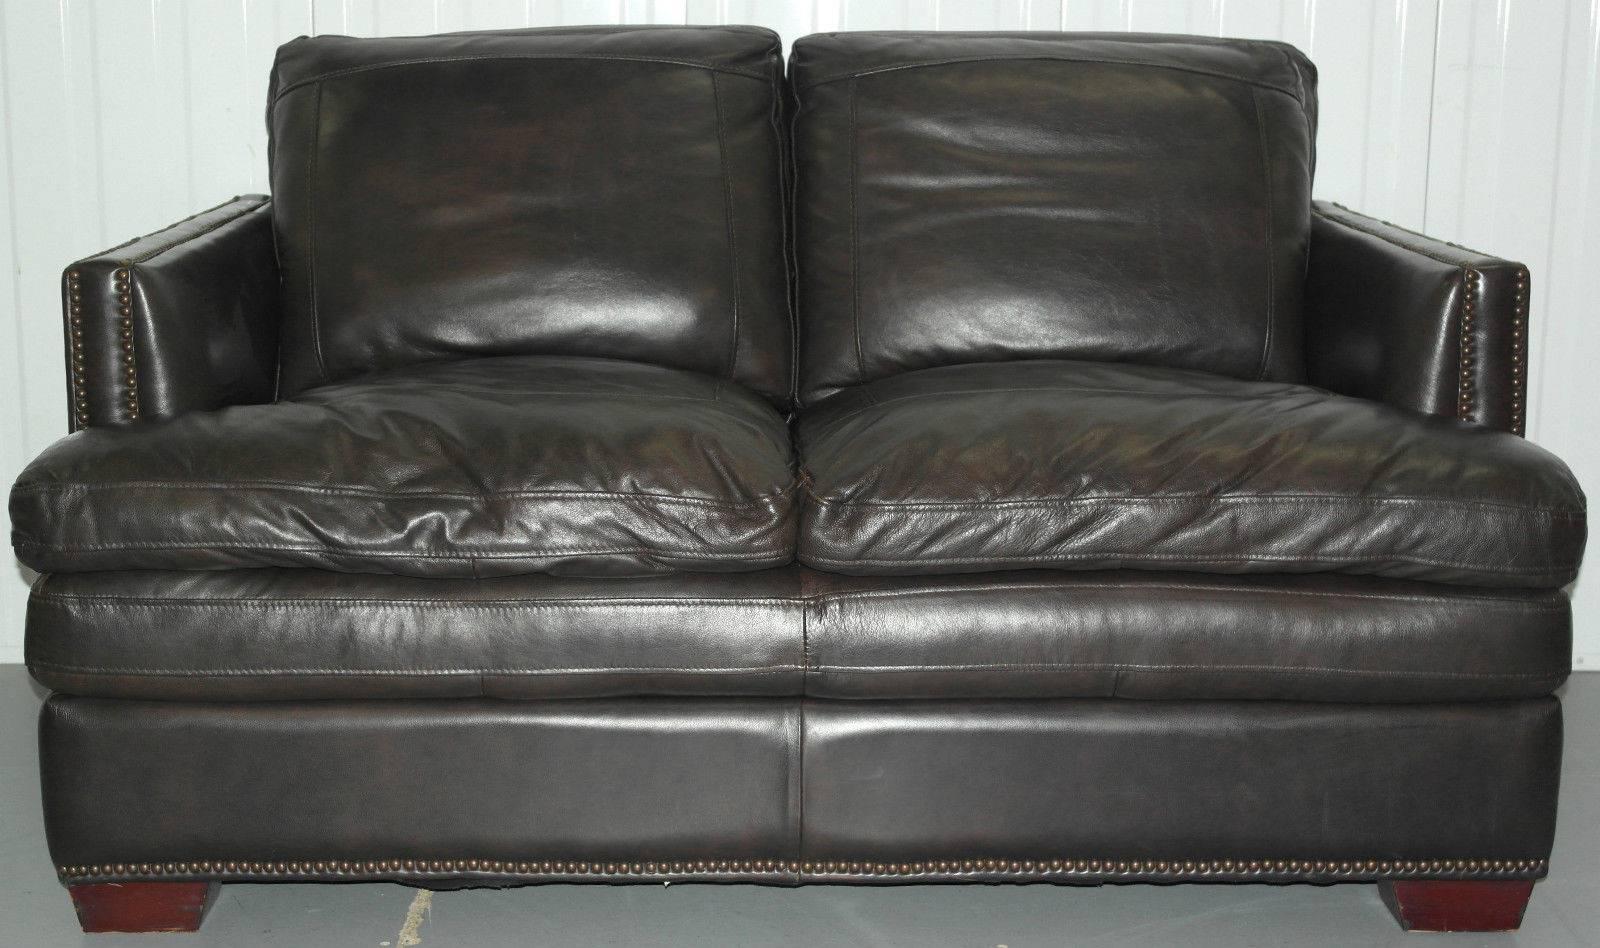 We are delighted to offer for sale this lovely extra comfortable double cushion brown leather studded club sofa

This is a real peach of a sofa, it's super comfortable, one of the best we’ve ever had come through the warehouse, its double